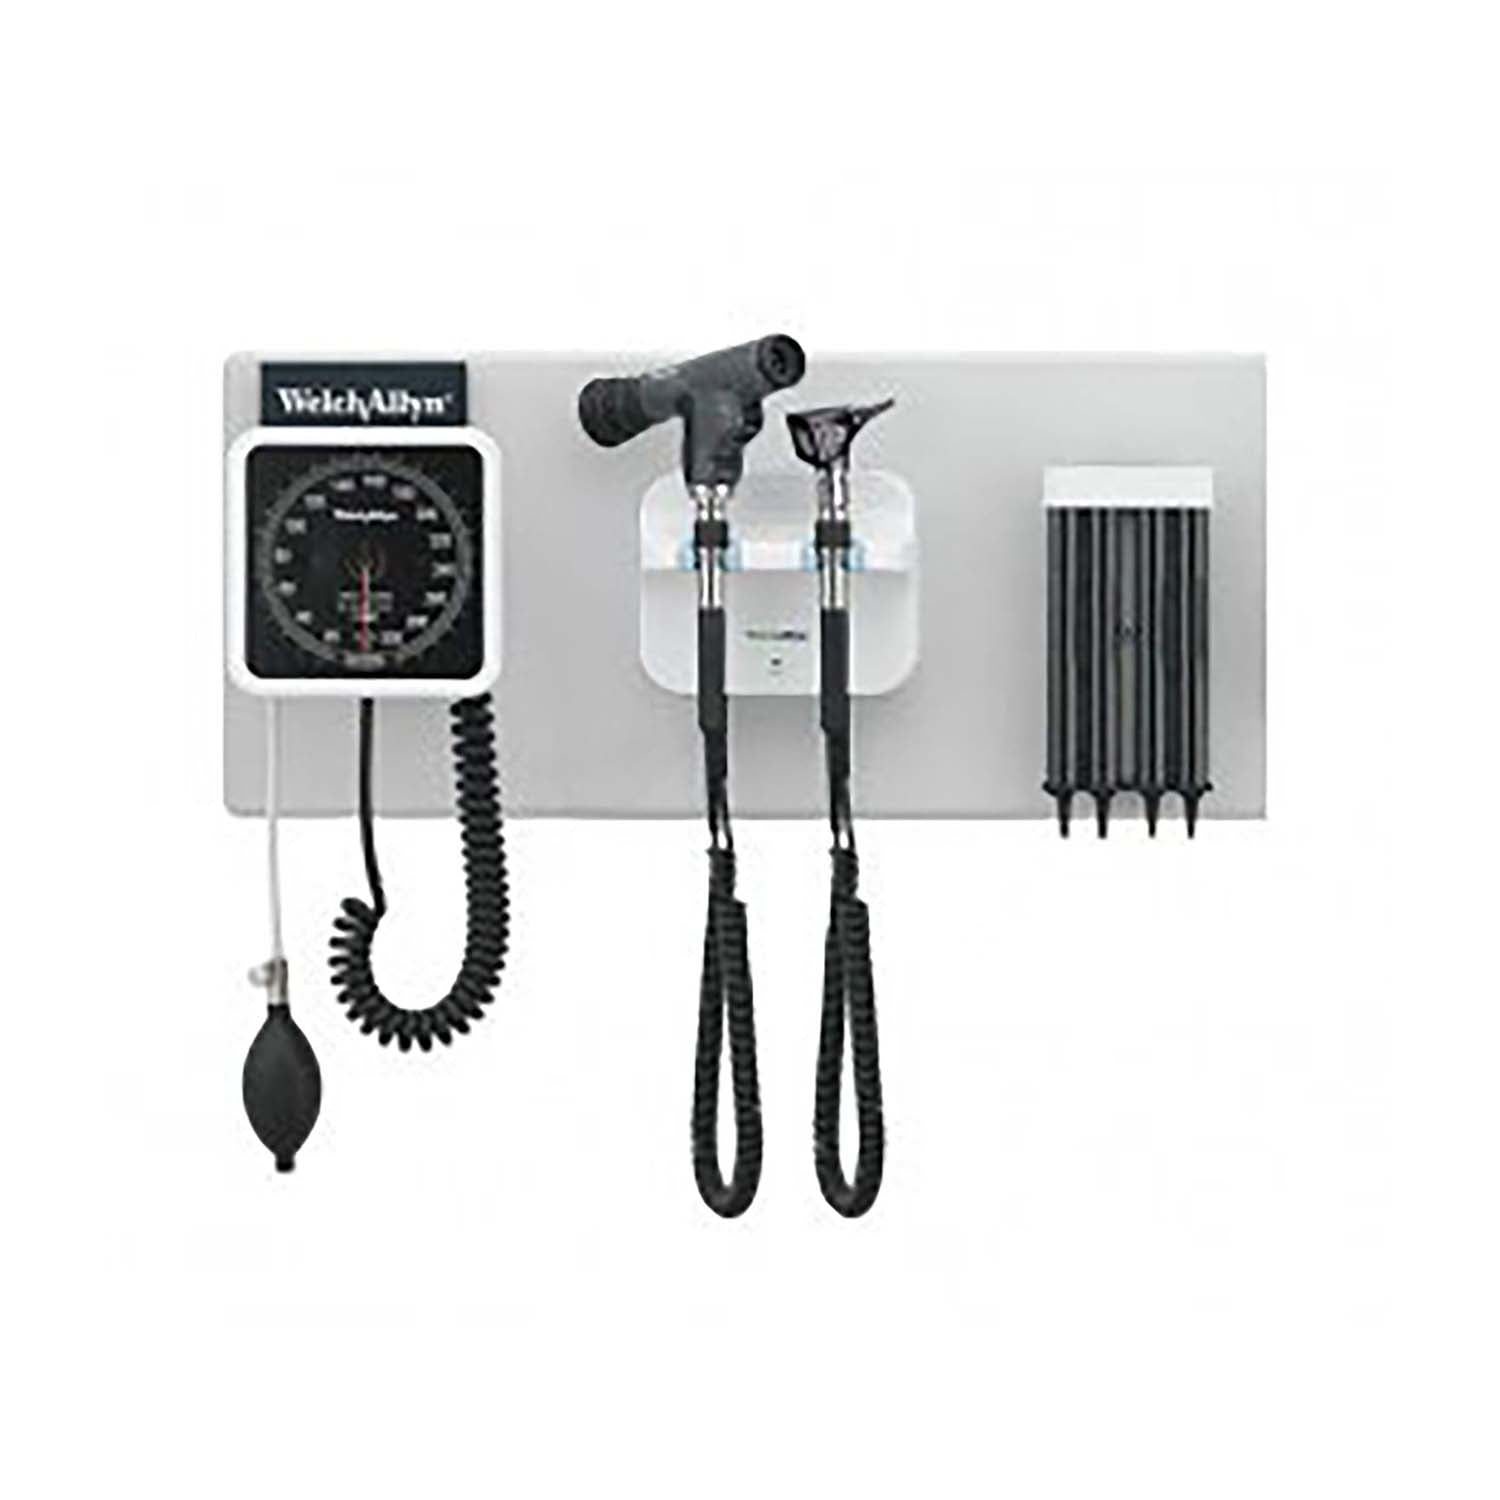 Welch Allyn GS777 Integrated Diagnostic System with 11821